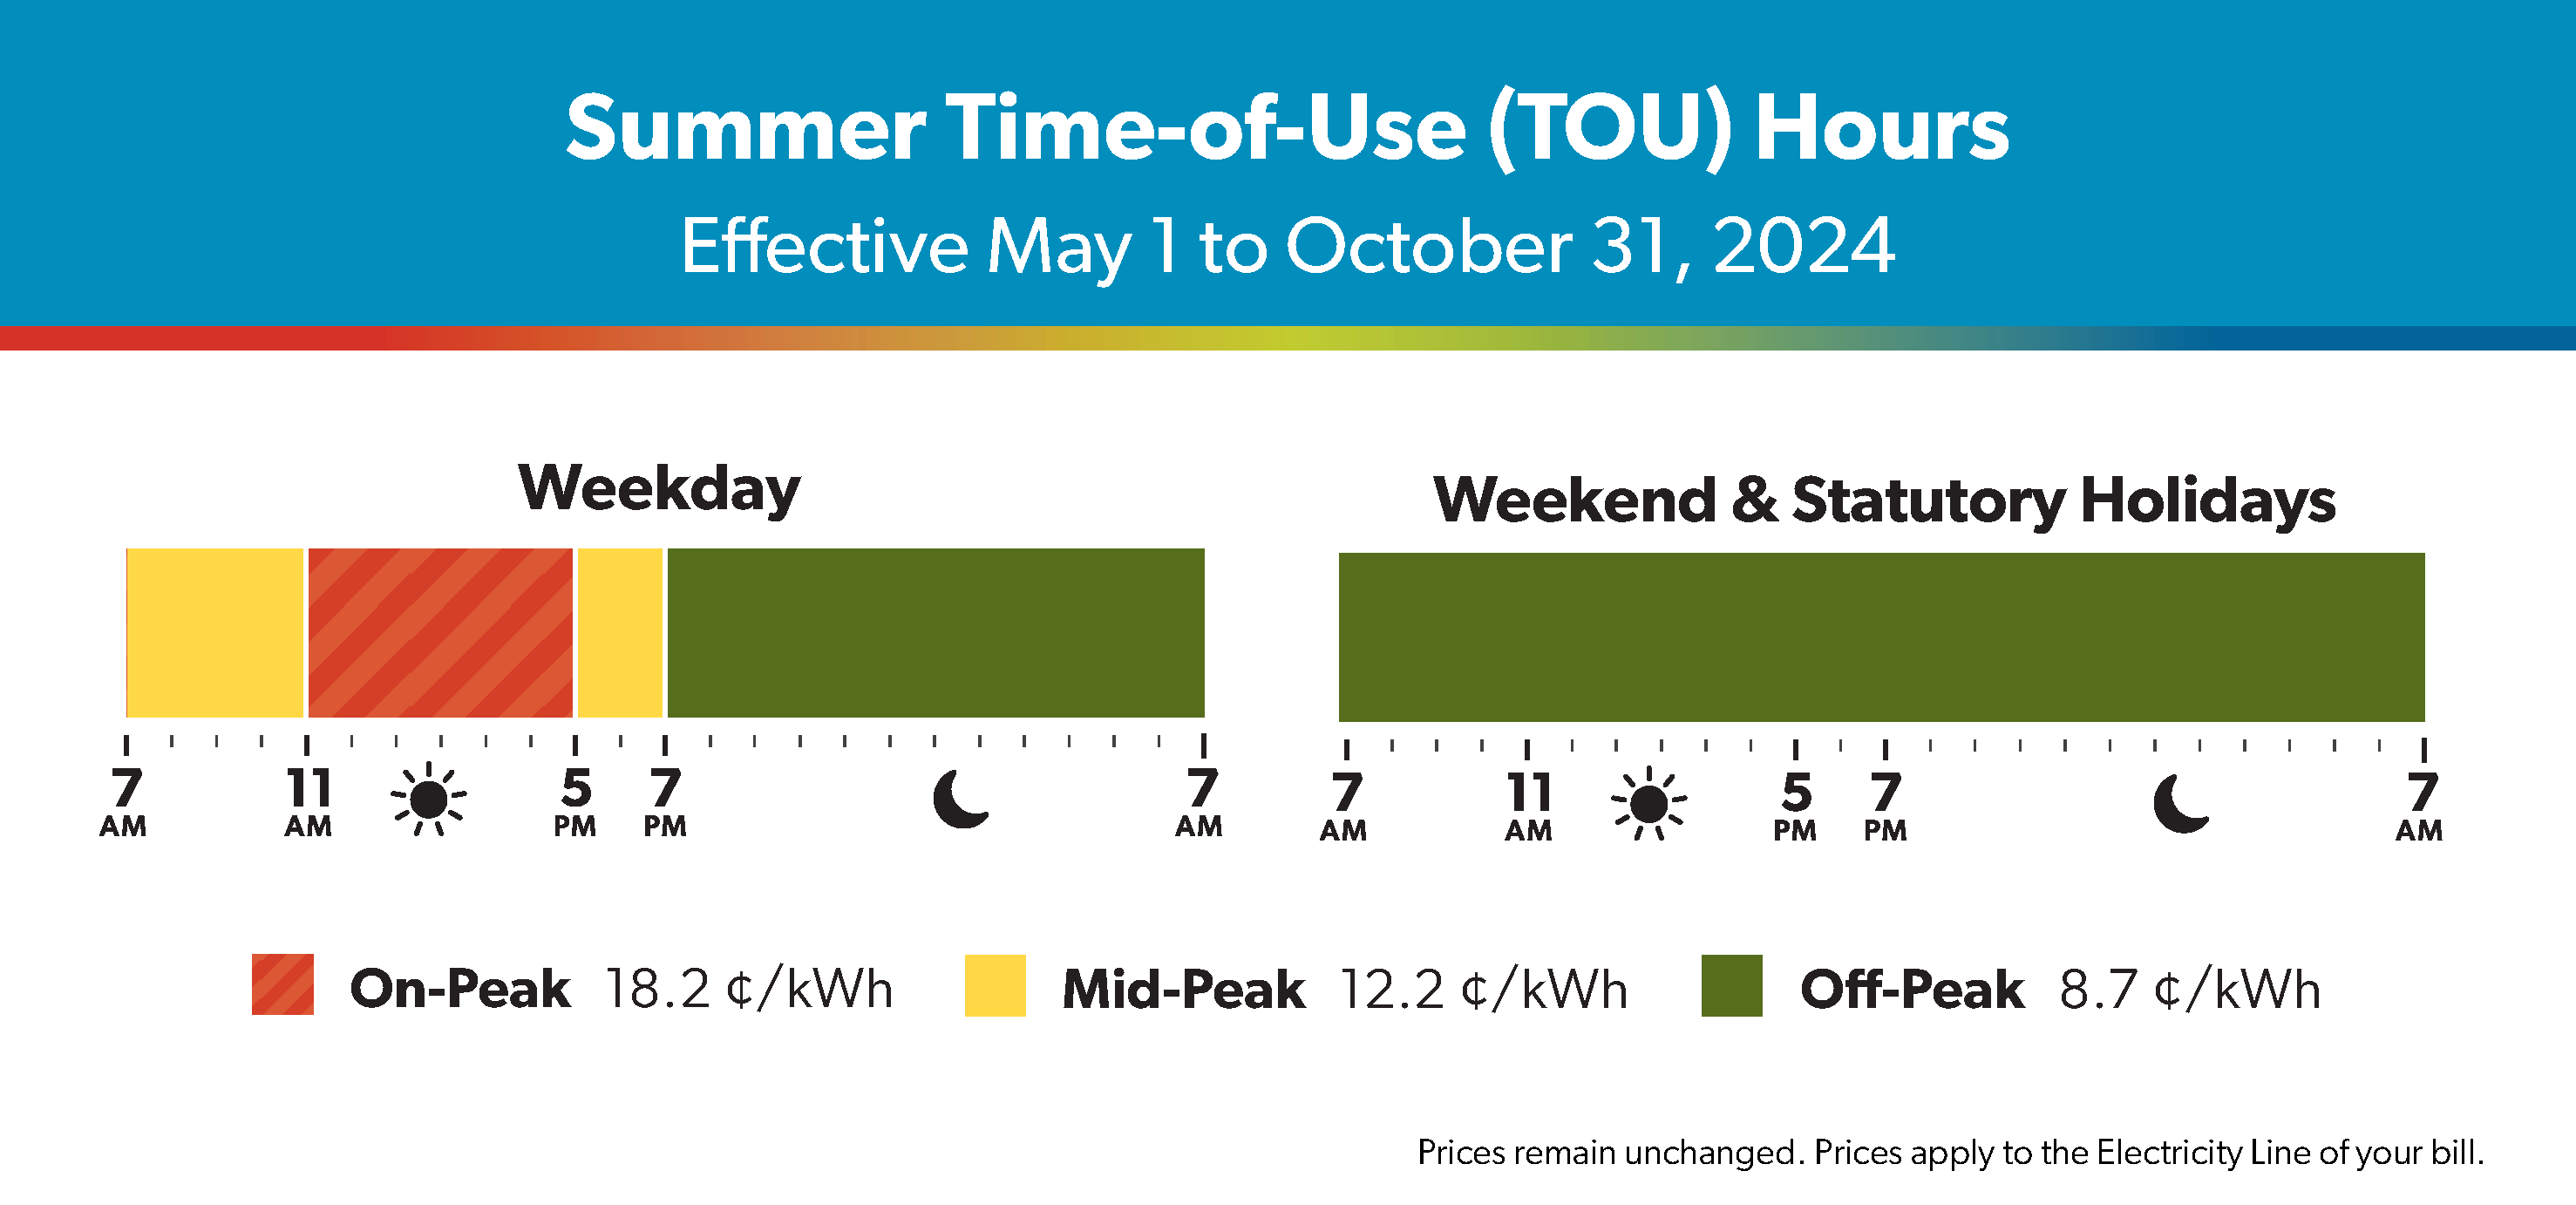 Summer time-of-use rates for period May 1 to October 31. On-peak rates are 18.2 cents per kilowatt-hour between 11 AM to 5 PM. Mid-peak rates are 12.2 cents per cents per kilowatt-hour between 7 AM to 11AM and 5 PM to 7PM. Off-peak rates are 8.7 cents per kilowatt-hour between 7 PM to 7 AM and at all hours on weekends and statutory holidays.